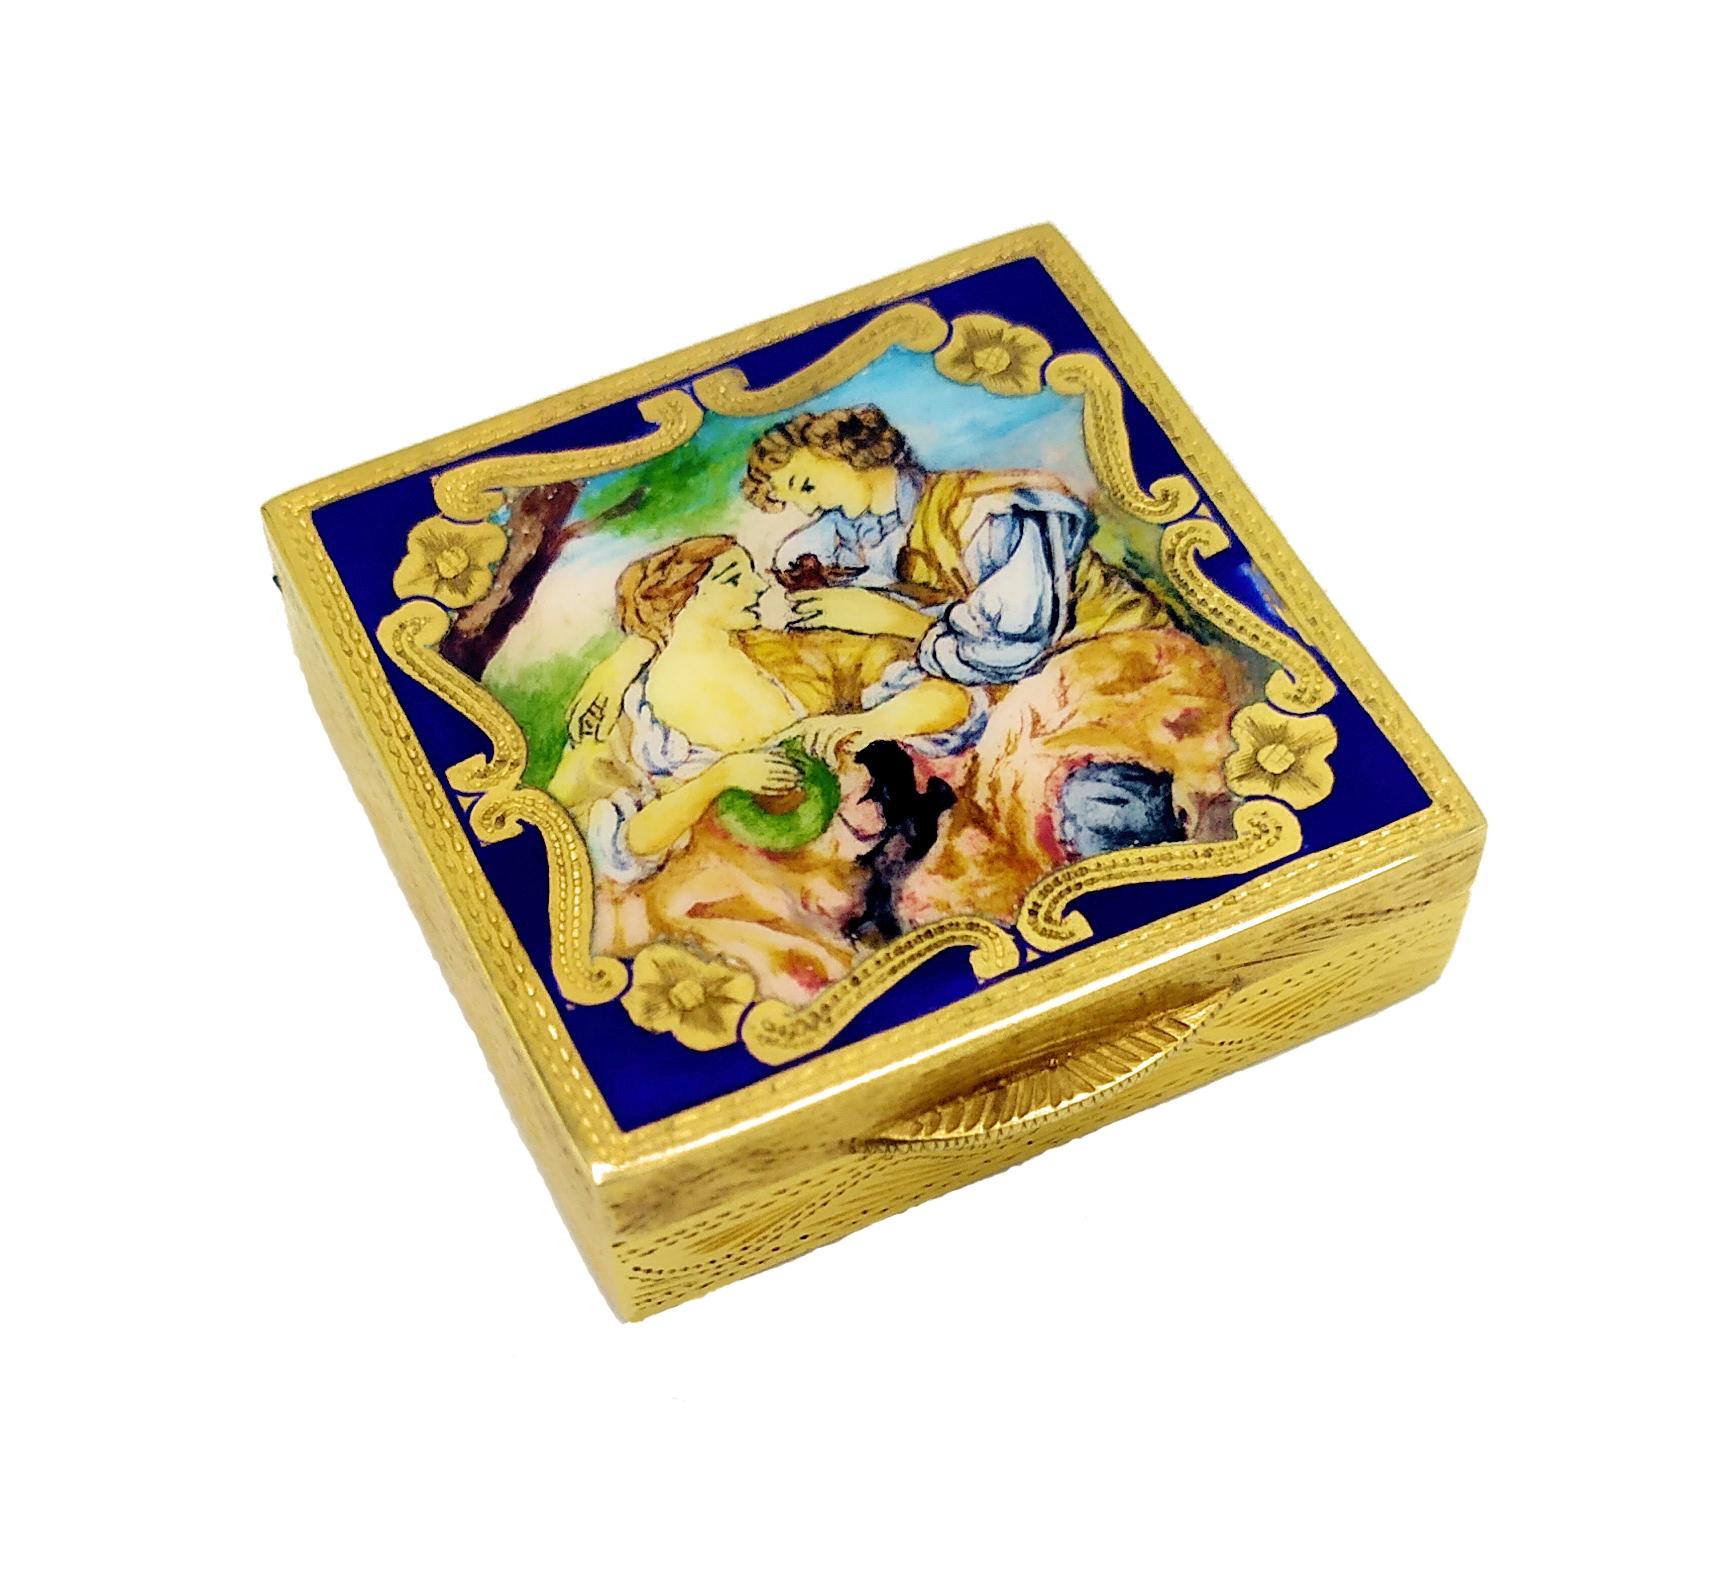 Love is the romantic theme of the hand-painted miniature enameled with 20 firings in the Louis XVI style of the second half of the nineteenth century.
The scene is surrounded by a frame with fine engravings which are then shown on all the sides of